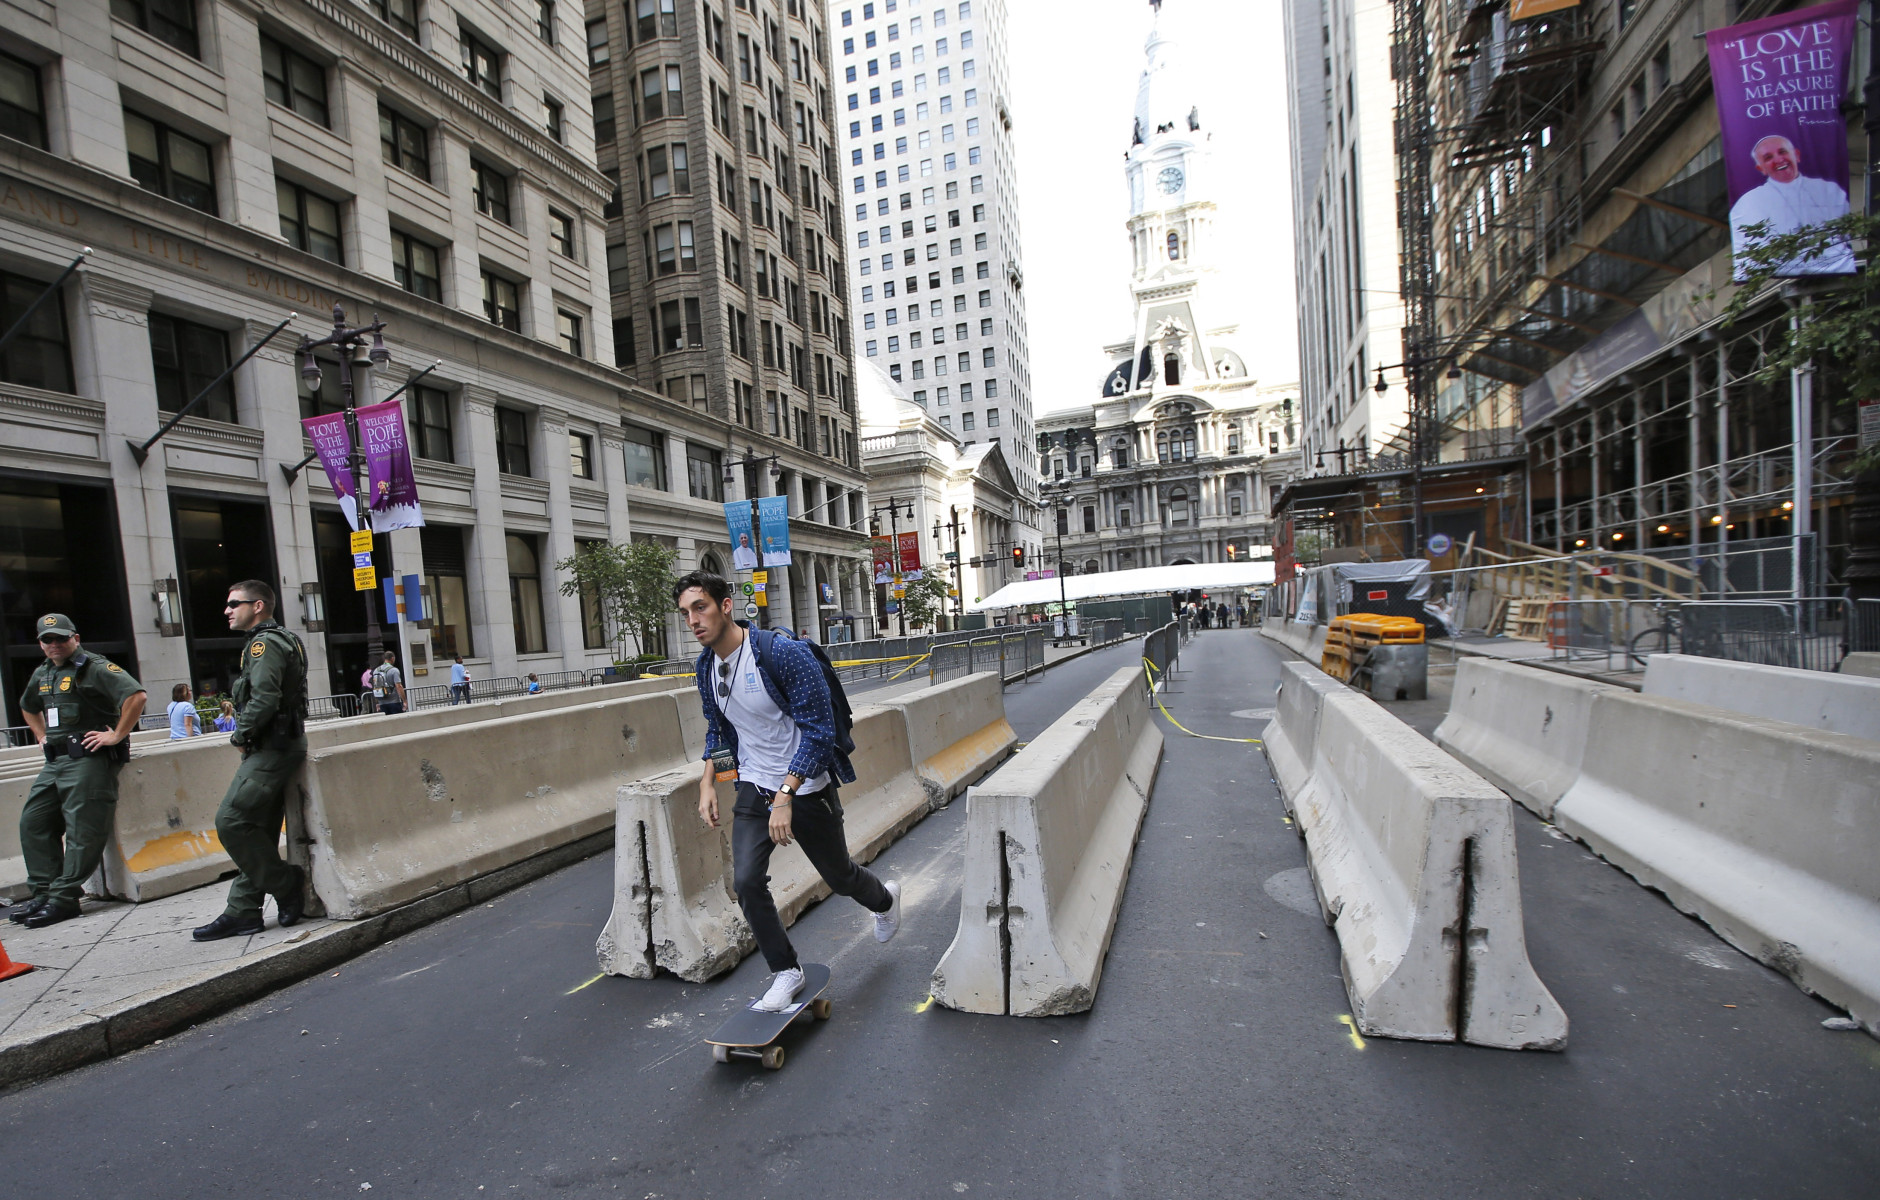 A man on a skateboard rides through a security checkpoint on Broad Street with City Hall in the background in Philadelphia on Friday, Sept. 25, 2015, before Pope Francis' upcoming visit. (AP Photo/Alex Brandon)